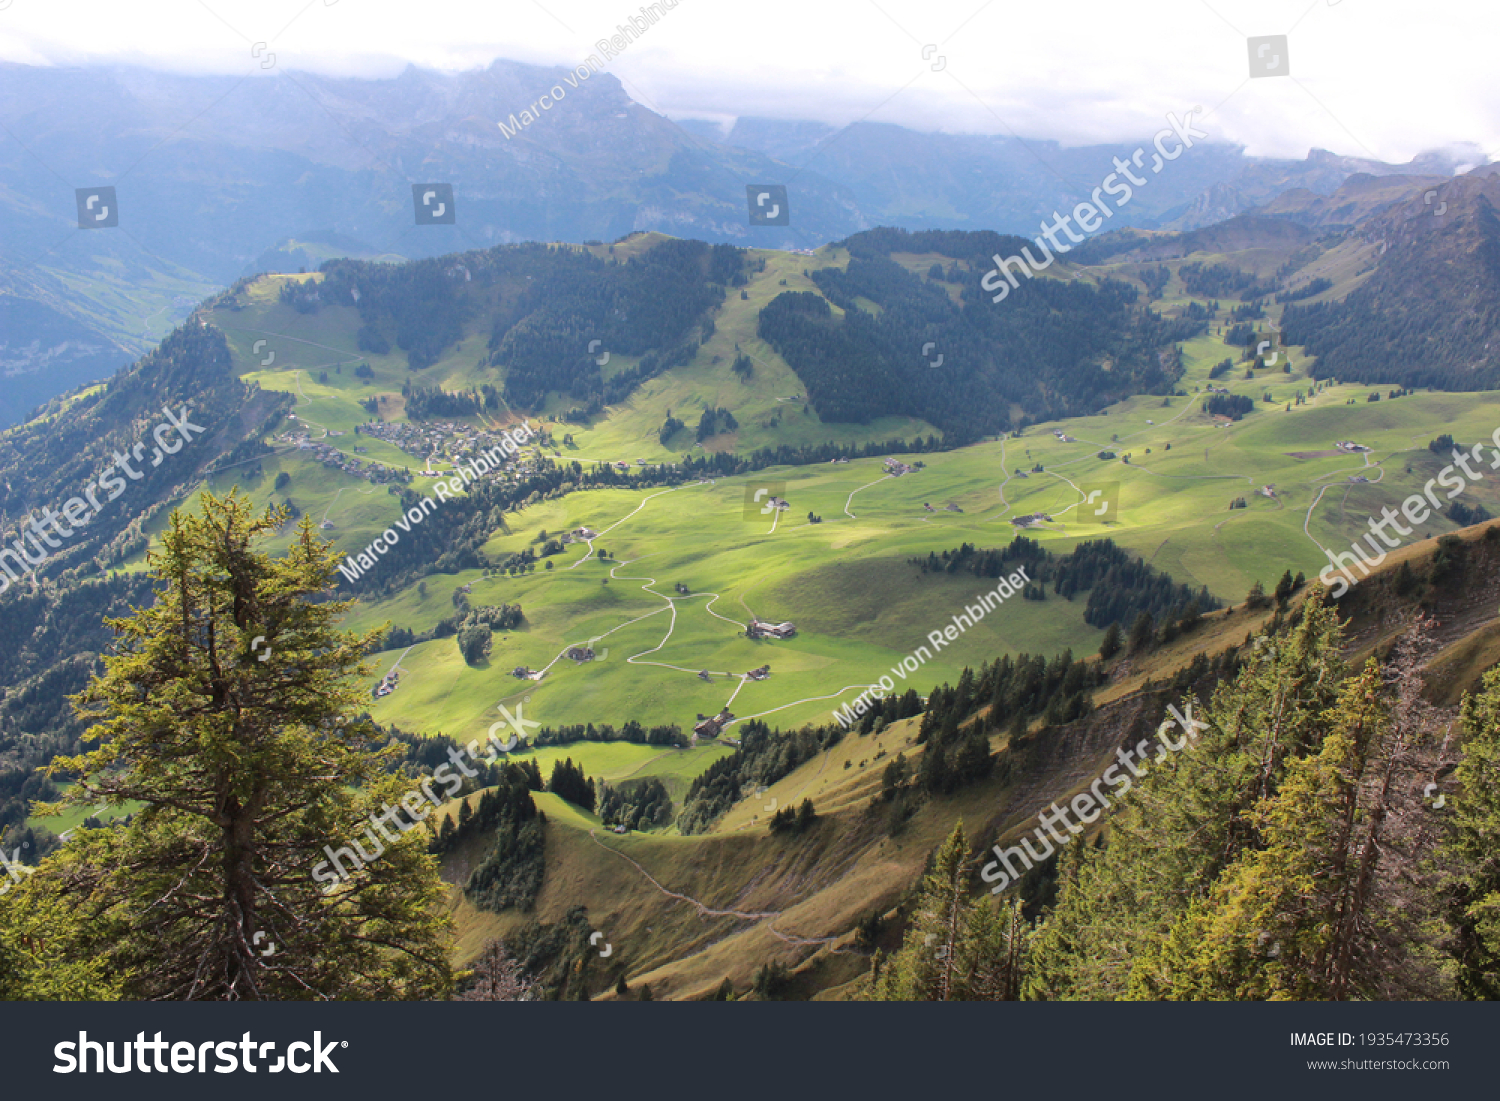 Stanserhorn Mountain, Stans, Switzerland:19 September 2015: A breathtaking Day taking the  funicular railway and roofless CabriO Cable Car up the Stanserhorn Mountain in Switzerland #1935473356